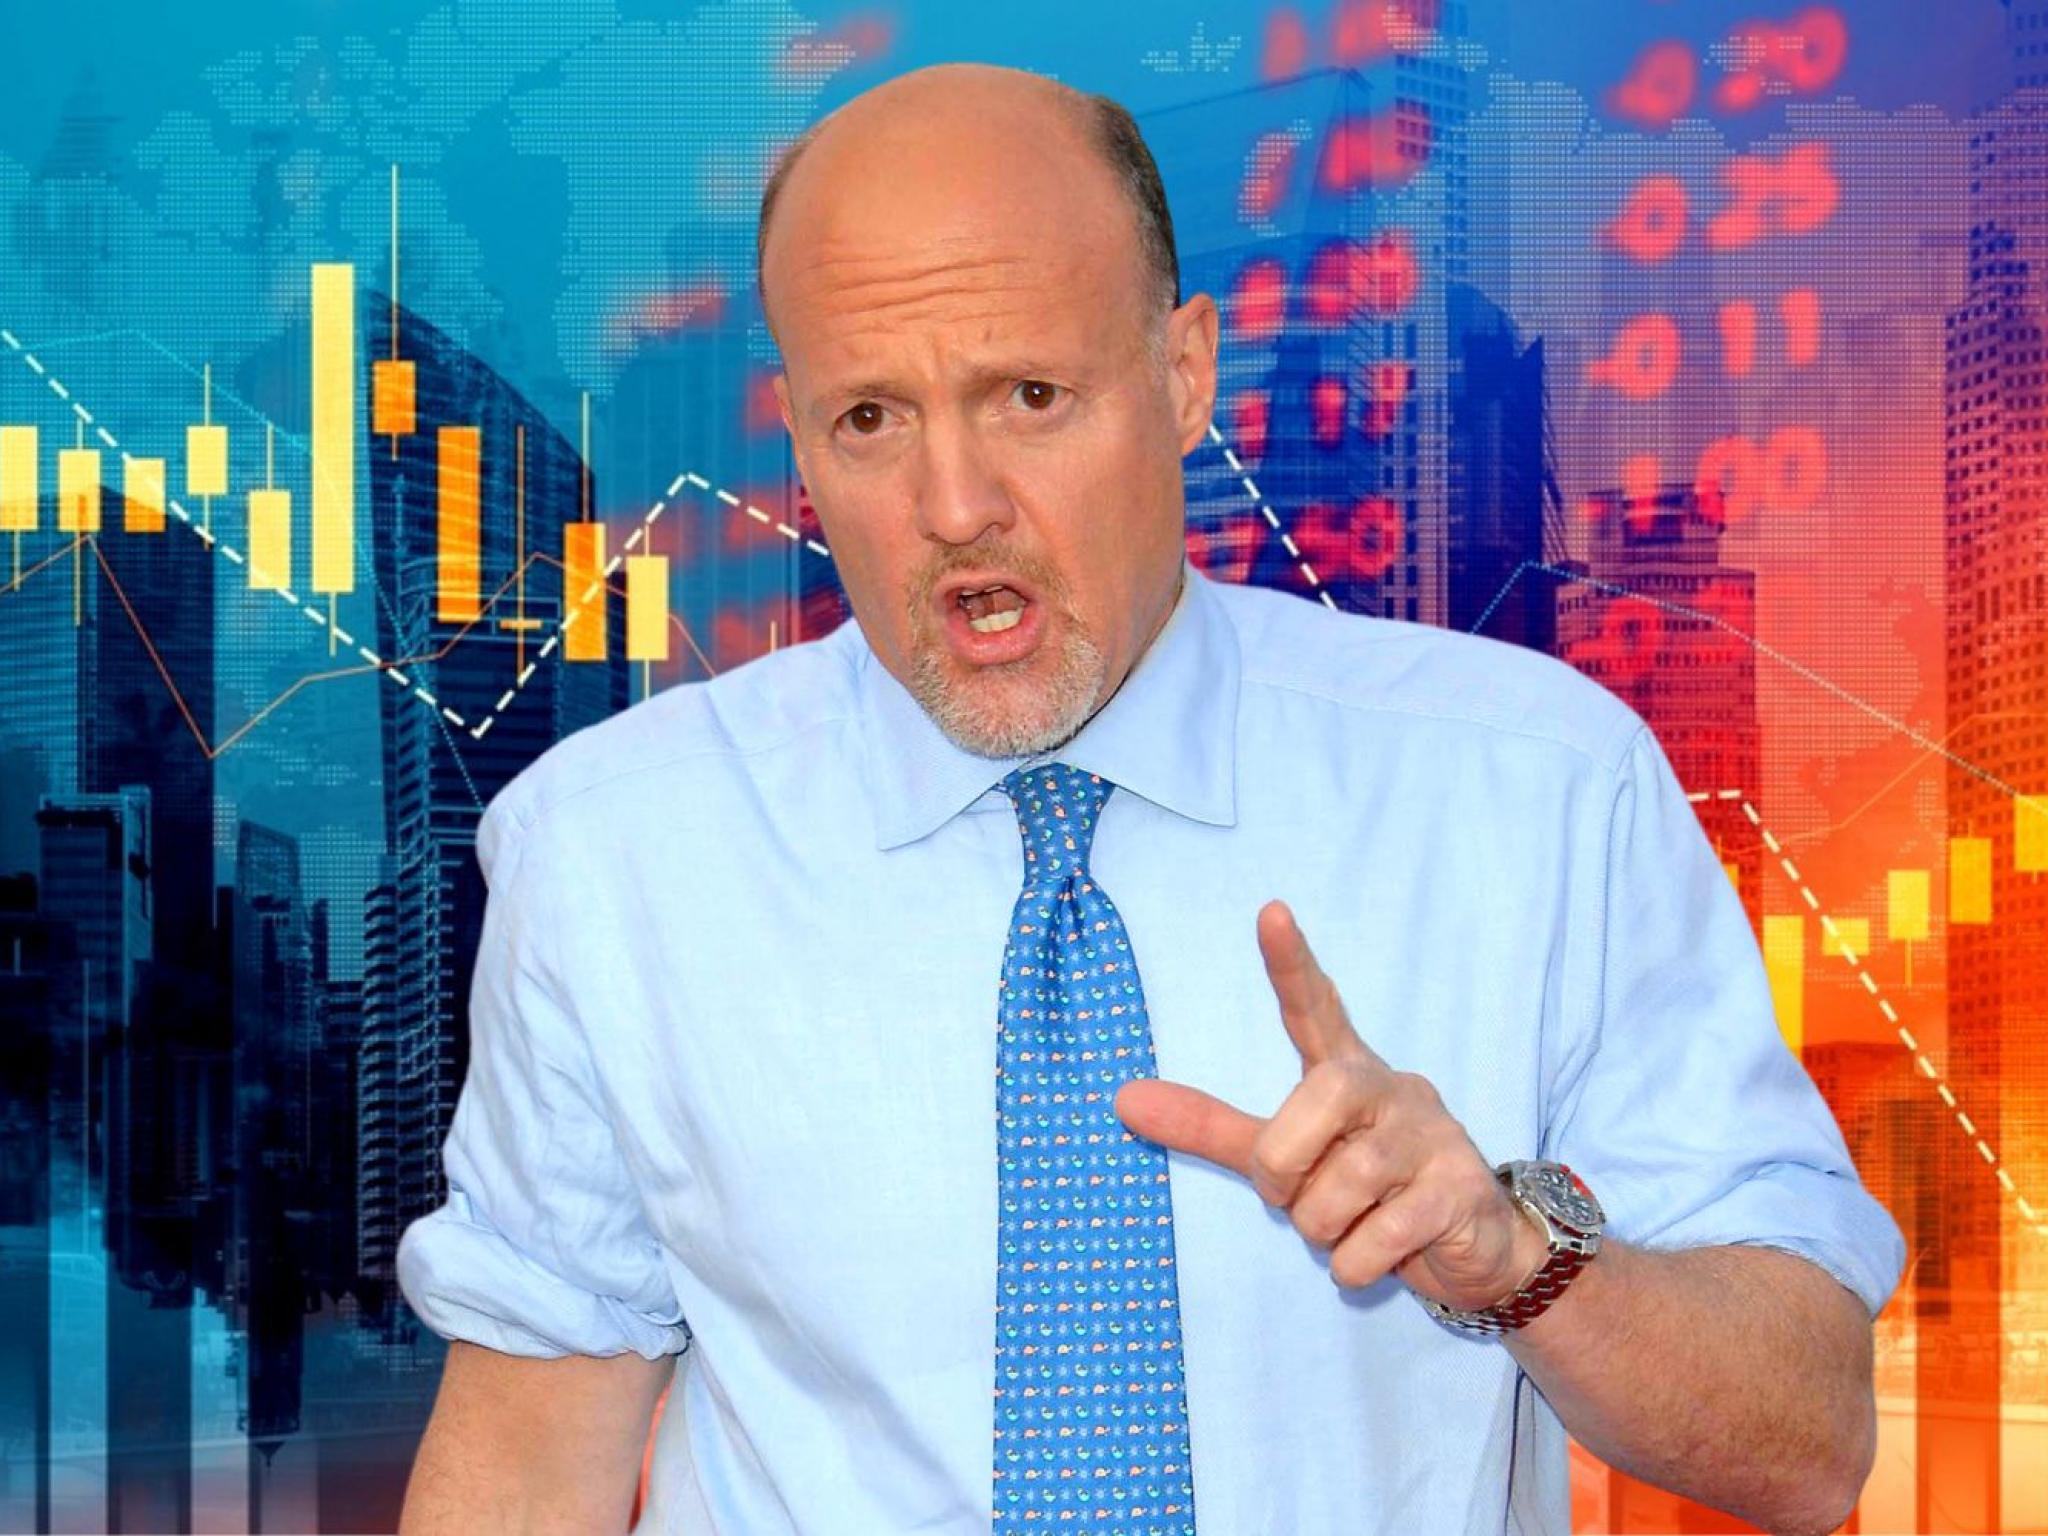  jim-cramer-says-this-is-a-very-very-expensive-stock-i-say-ka-ching-ka-ching-on-some-of-that-one 